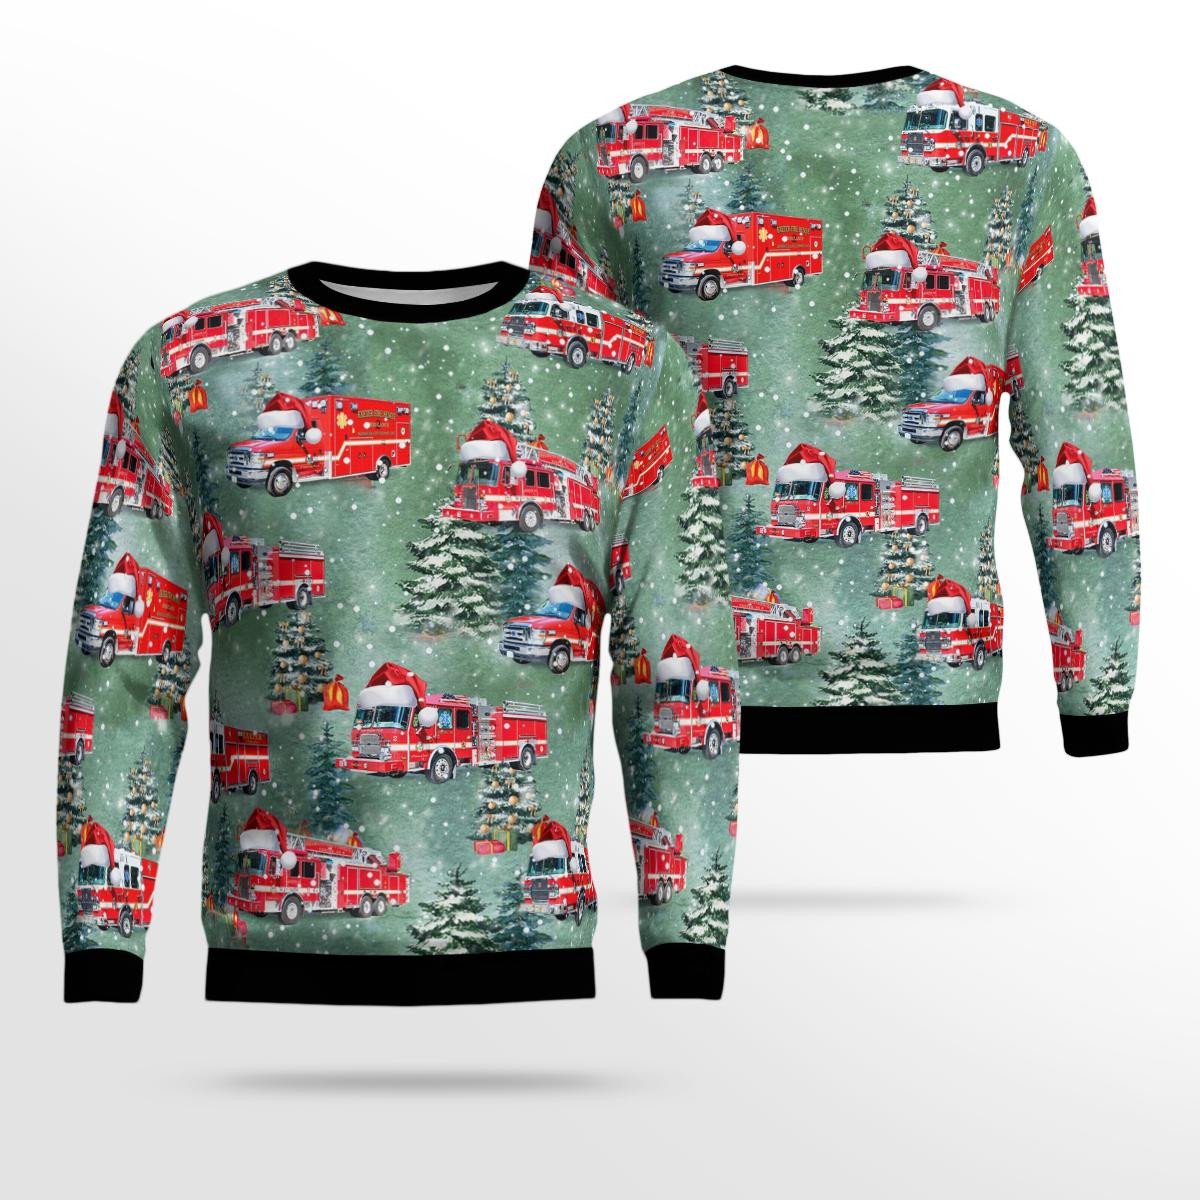 Exeter/ New Hampshire/ Exeter Fire Department Aop Ugly Sweater